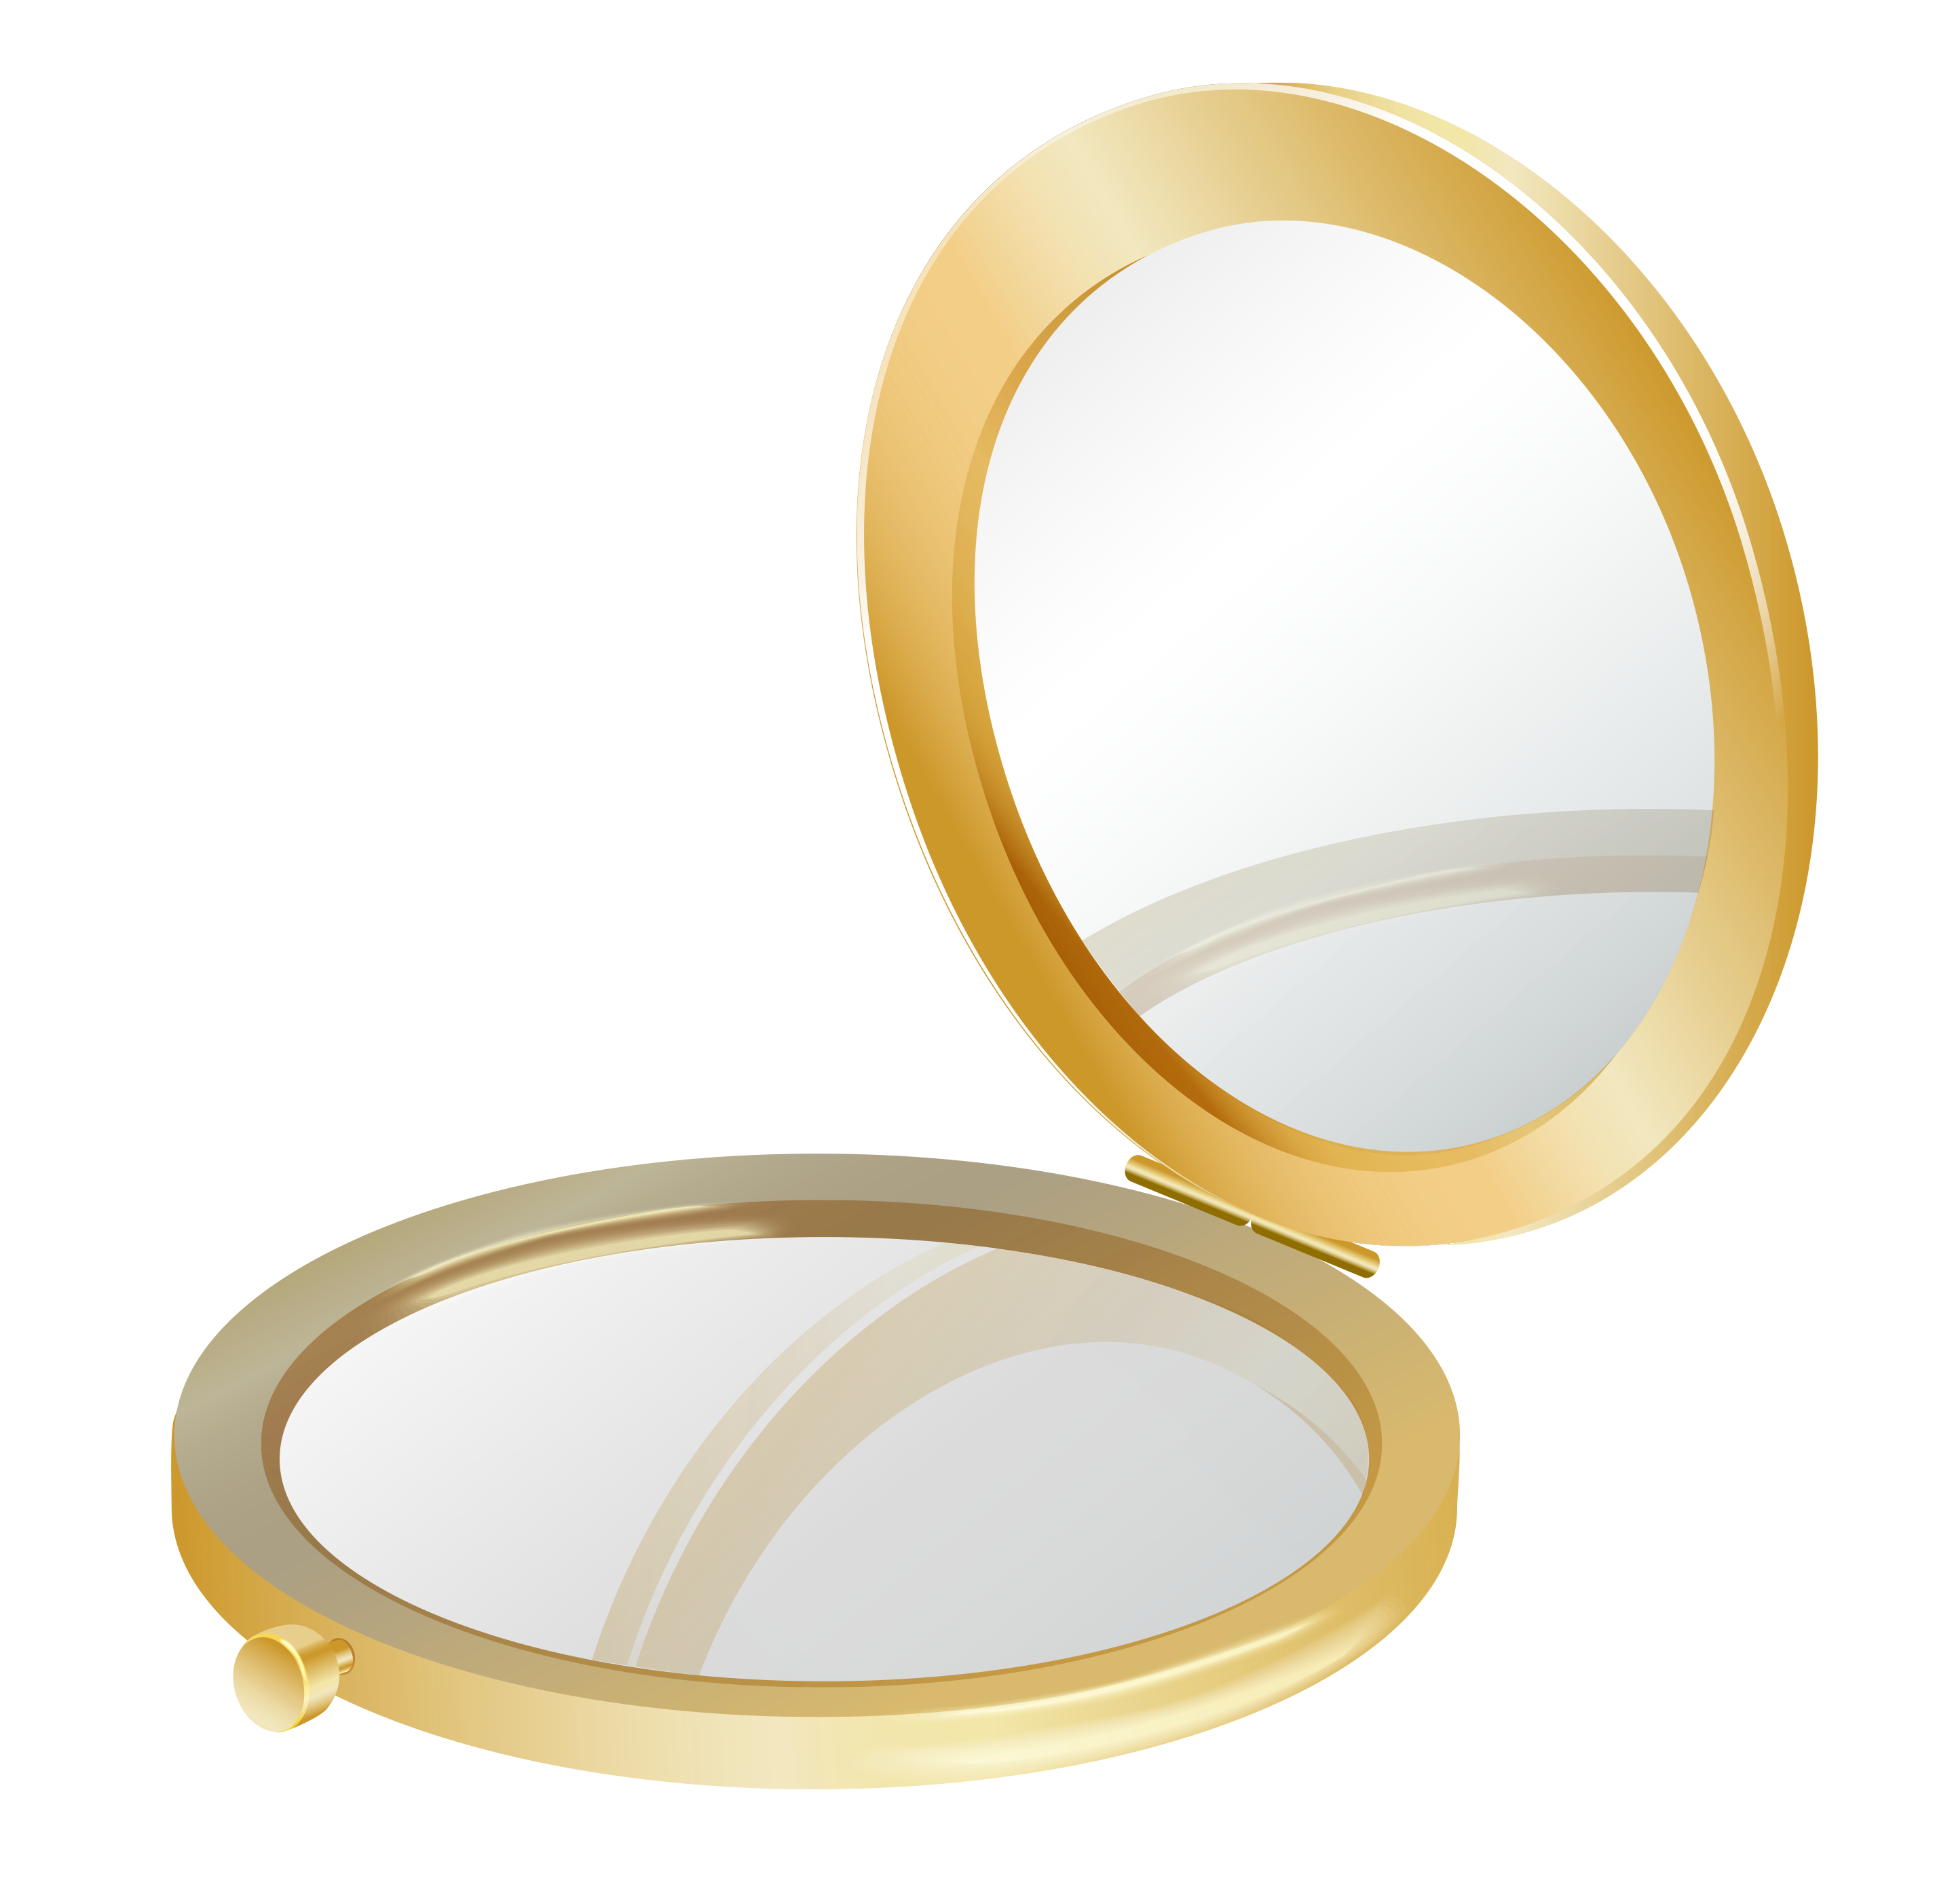 Gold Compact Mirror Png Clipart Picture Gallery Yopriceville High Quality Images And Transparent Png Free Clipart